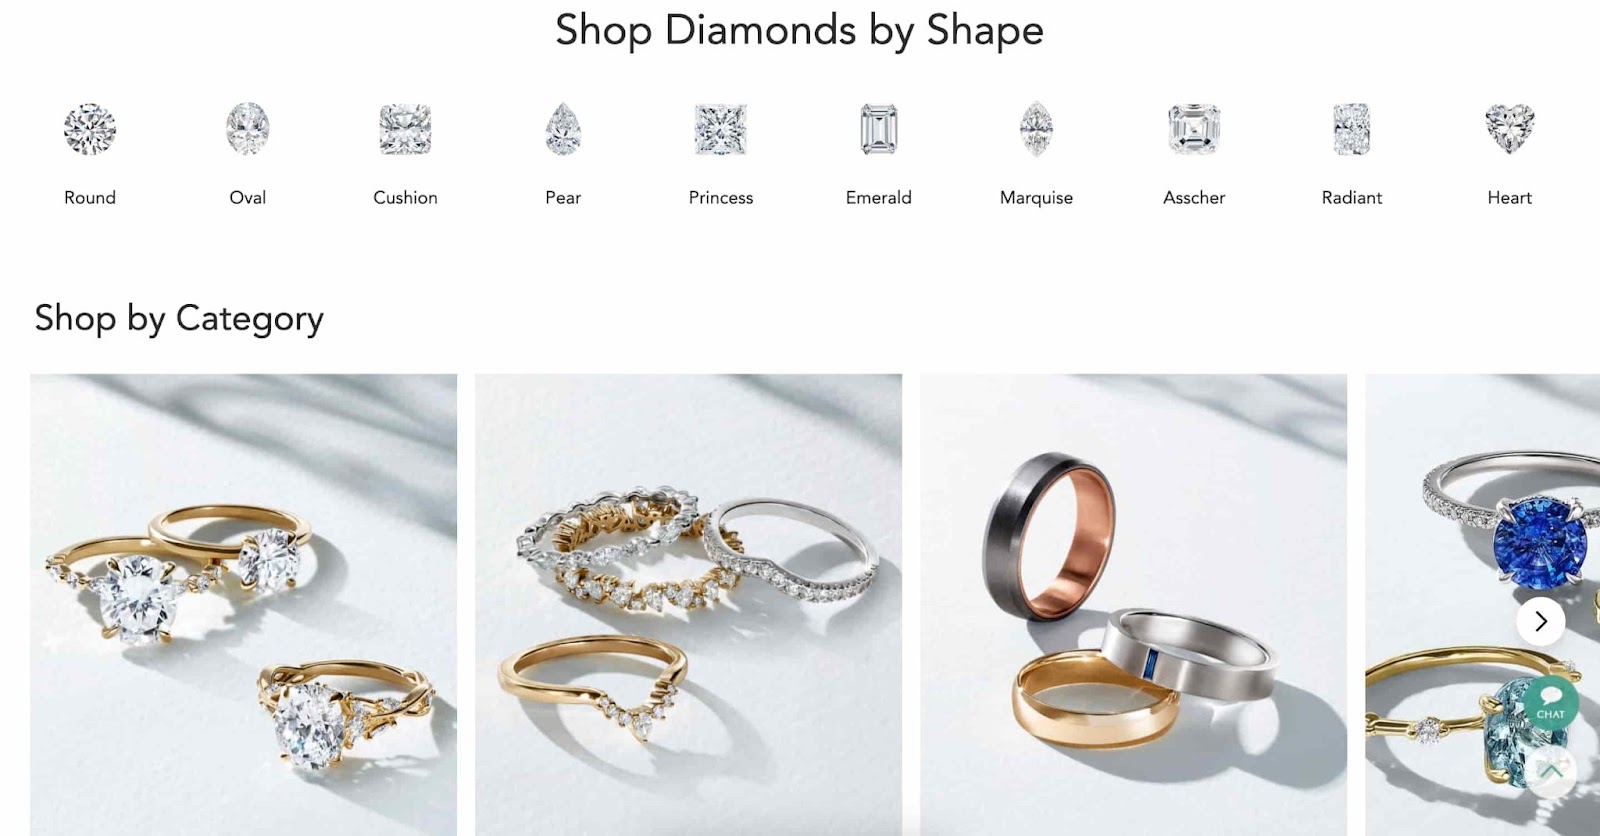 Brilliant Earth product display allowing you to shop for jewelry by shape